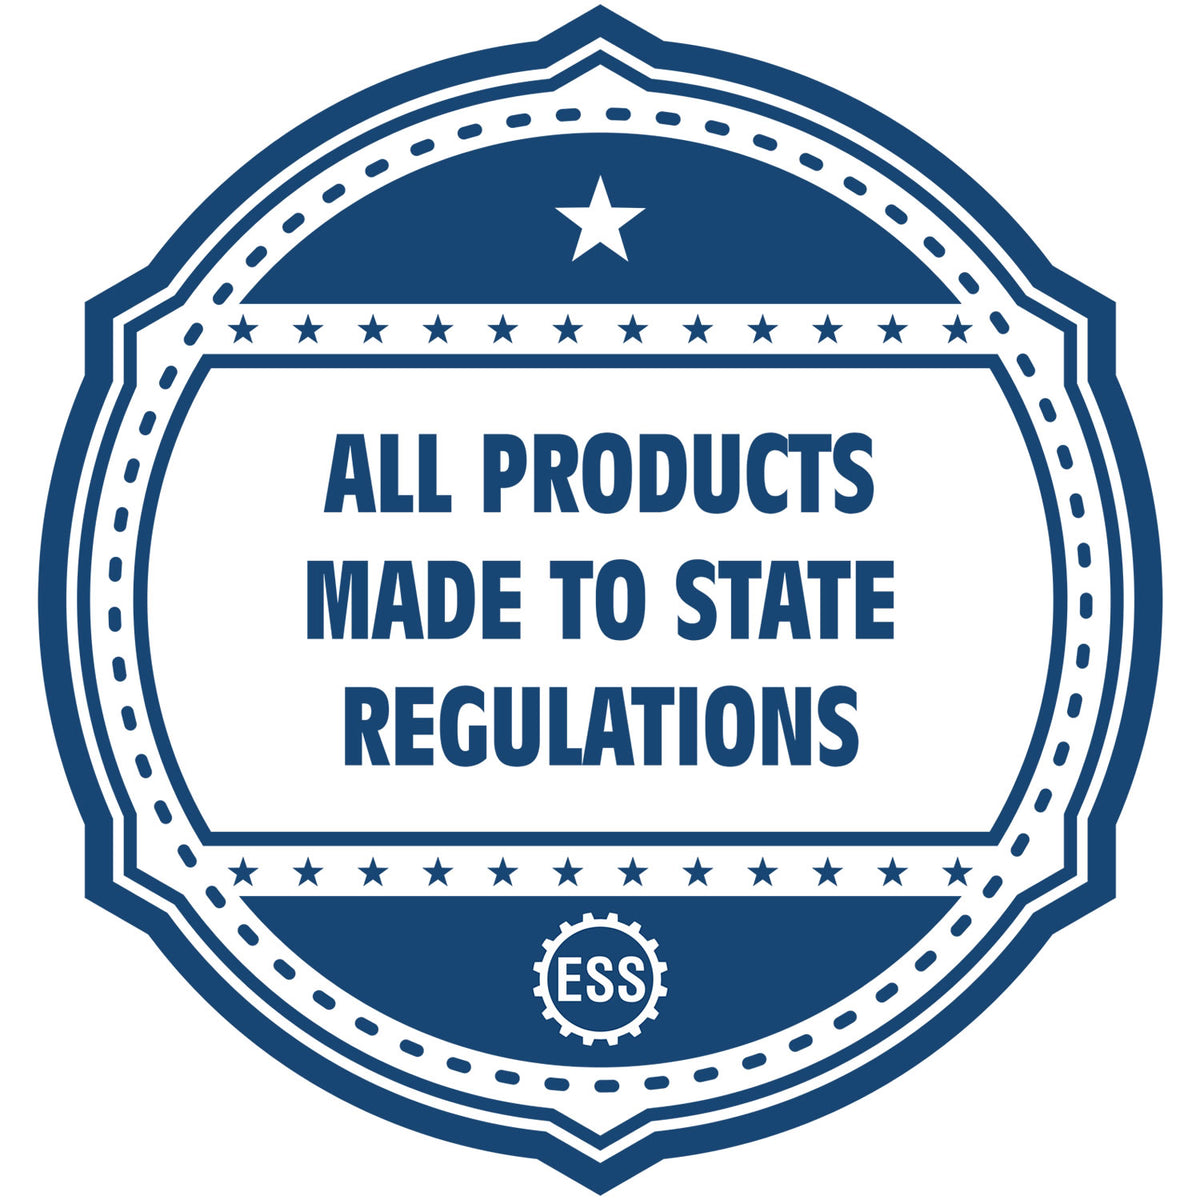 A blue icon or badge for the Gift Tennessee Architect Seal showing that this product is made in compliance with state regulations.